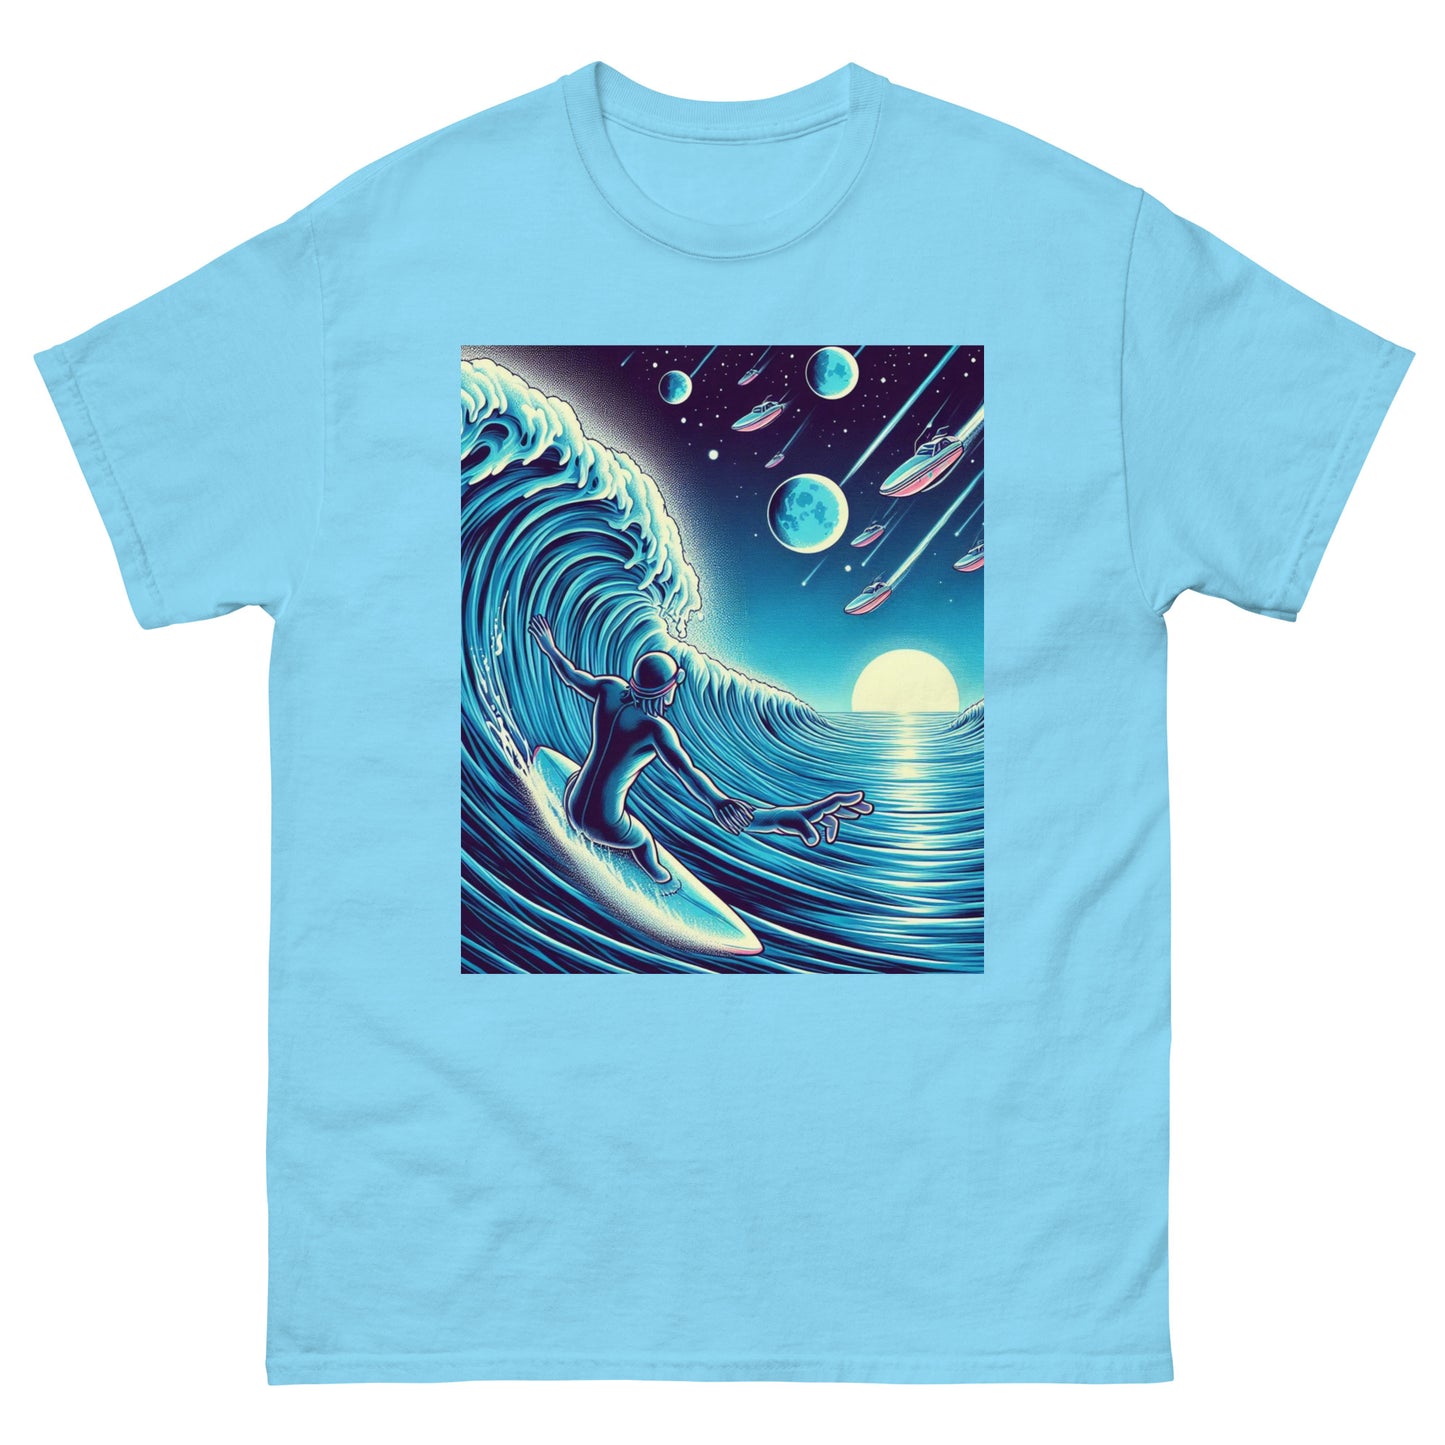 "Wave In Space" T-Shirt